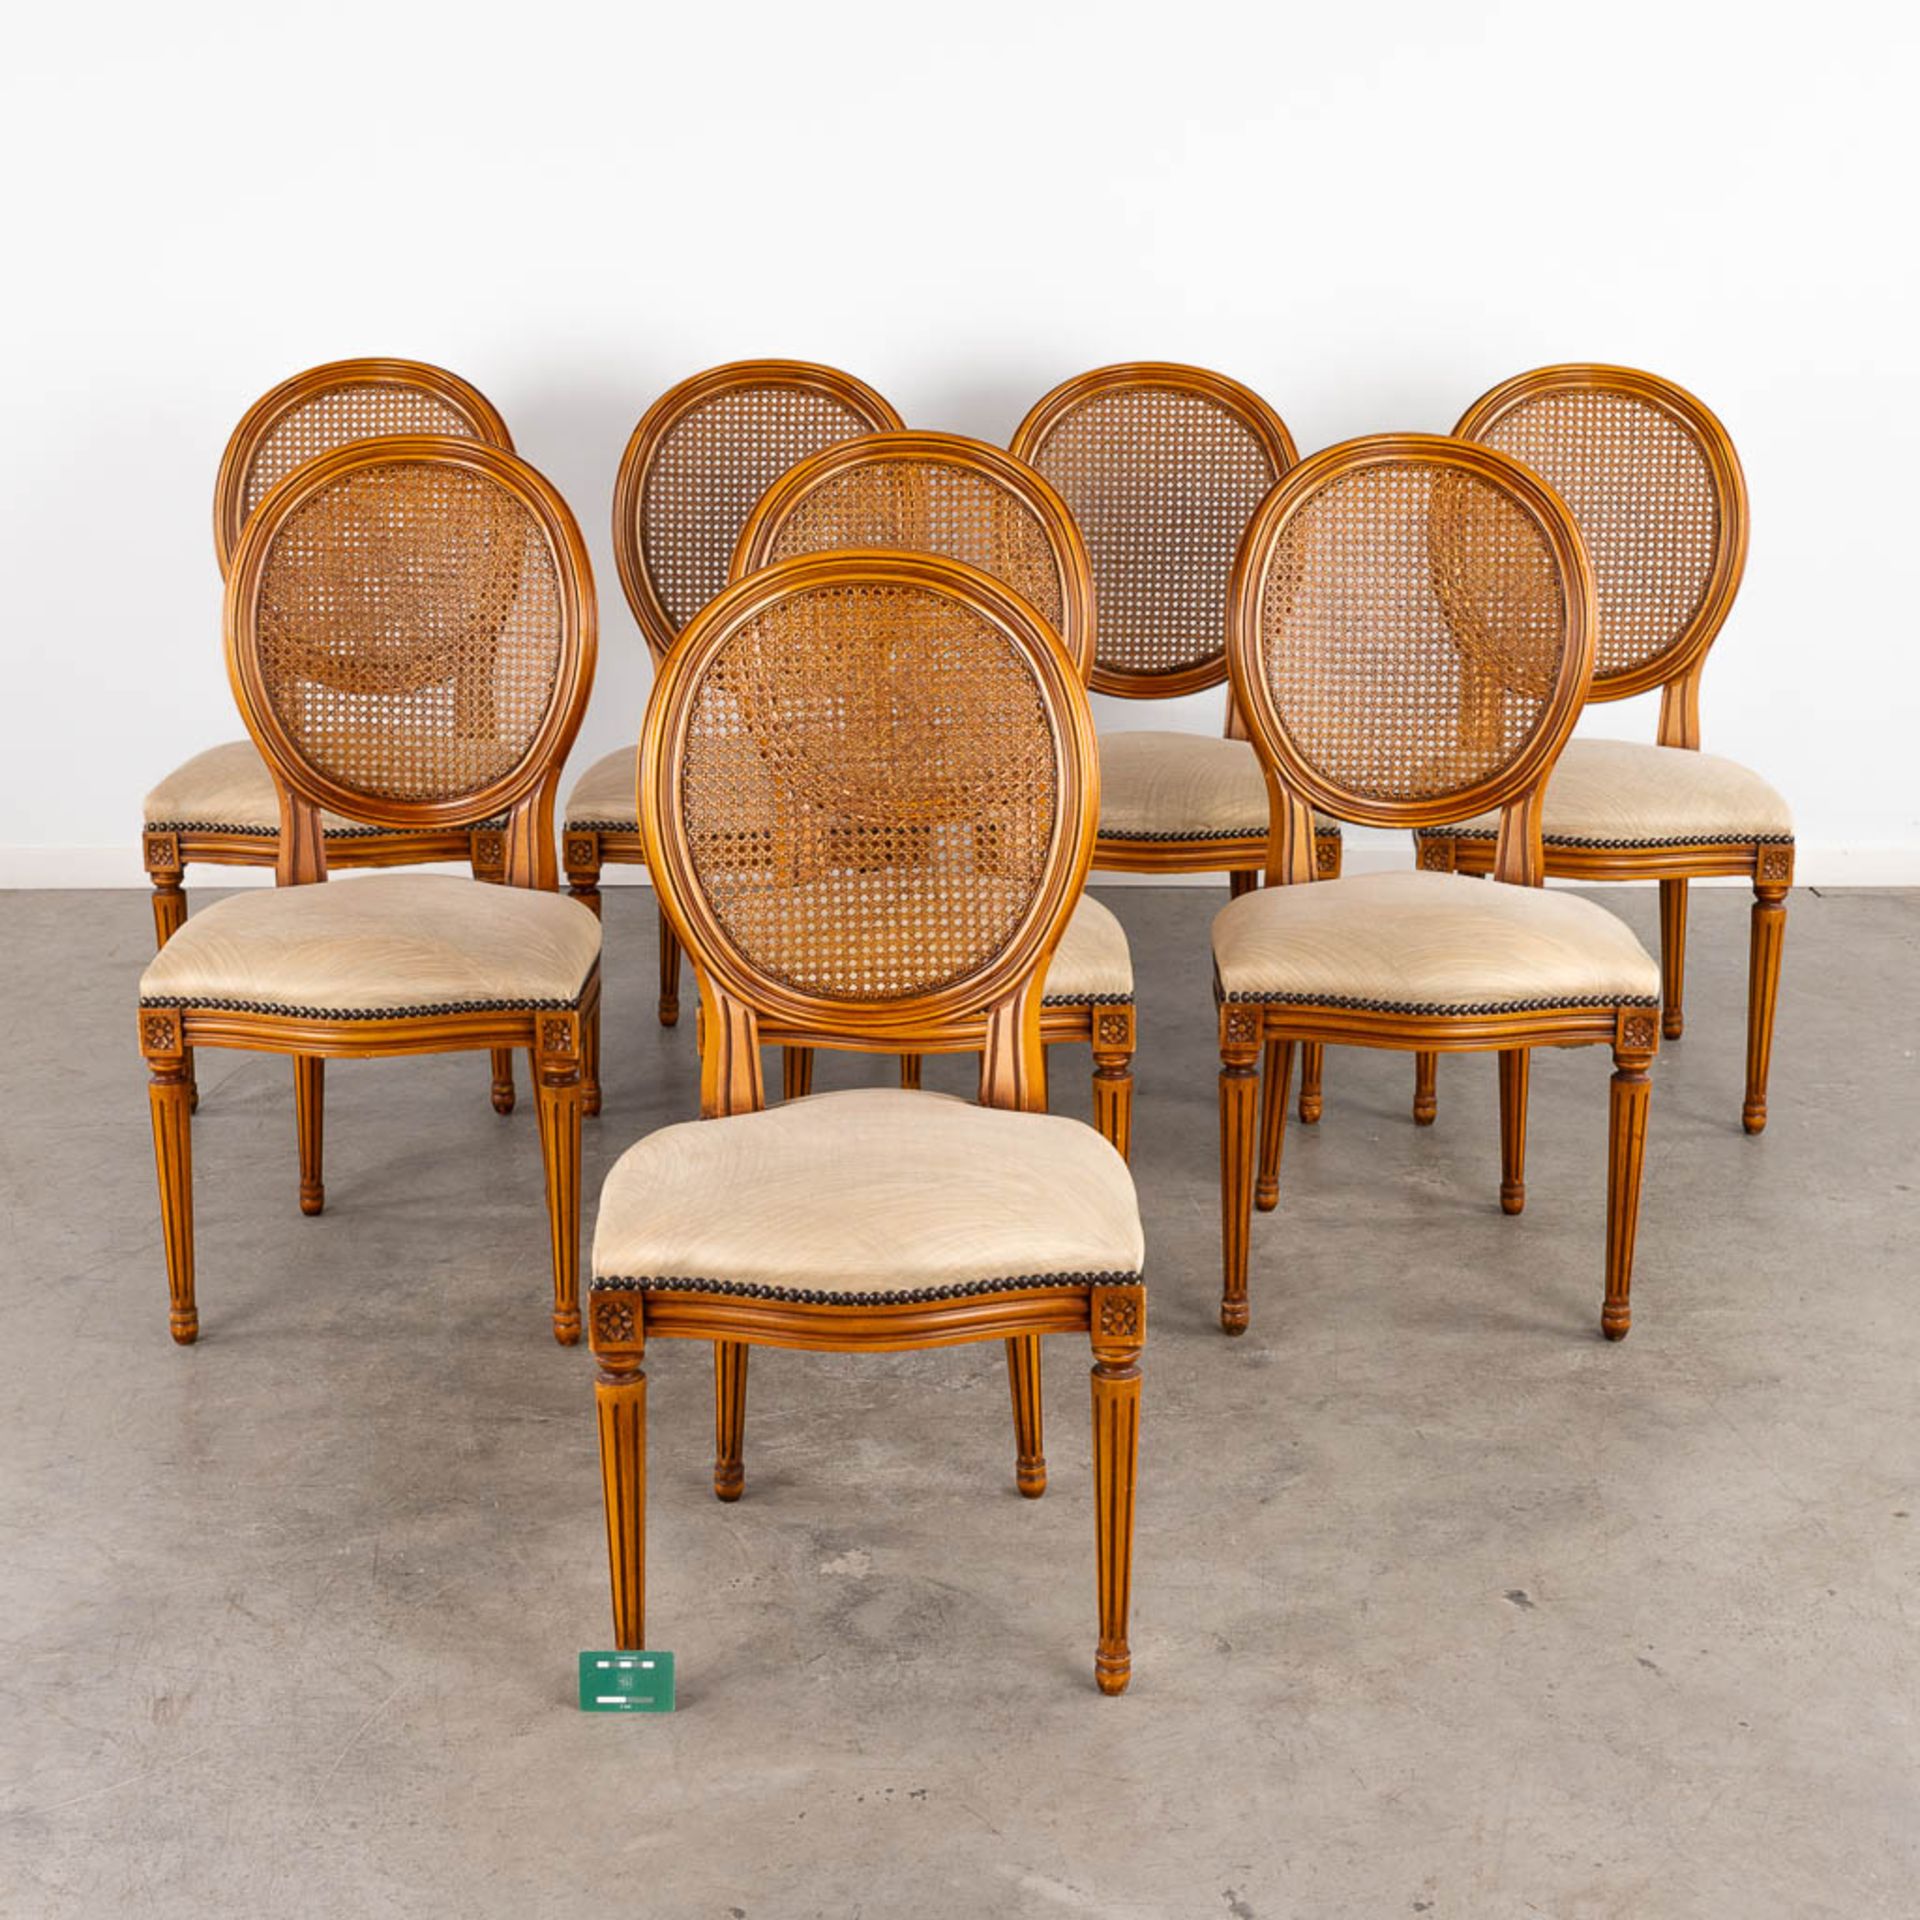 Giorgetti, 8 chairs, Louis XVI style finished with caning. (D:48 x W:48 x H:95 cm) - Image 2 of 13